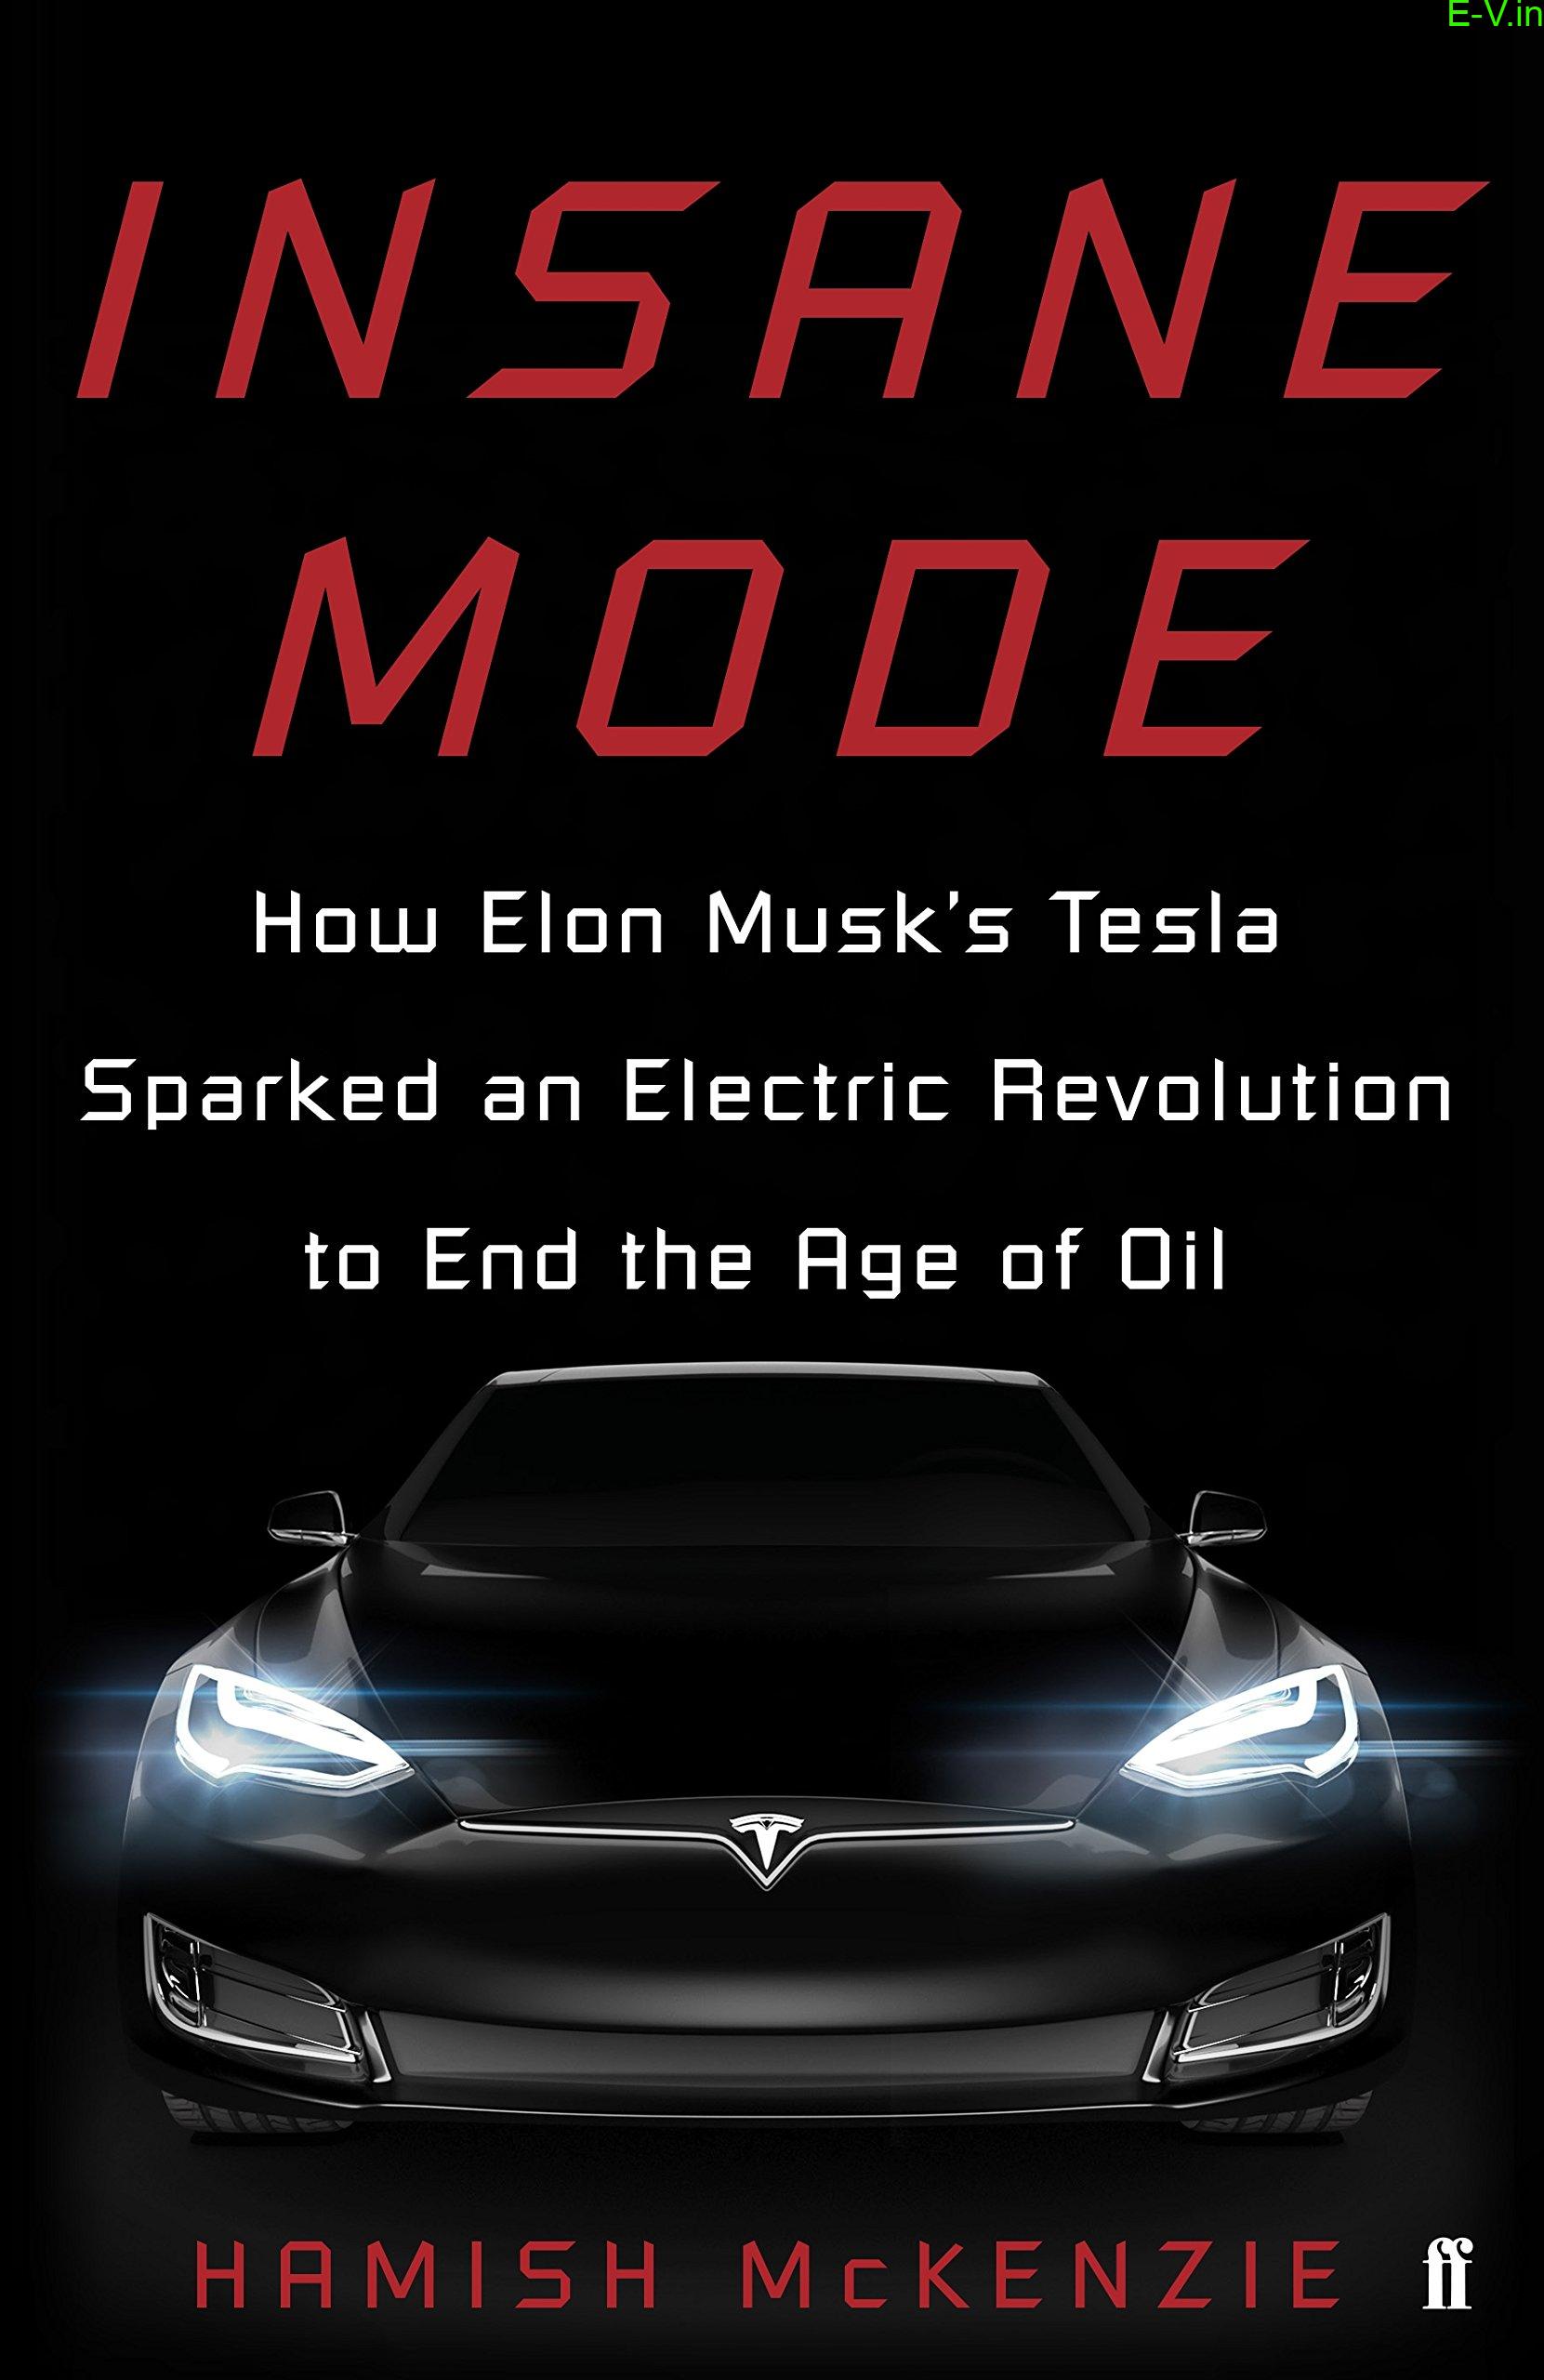 Top 5 electric vehicles books